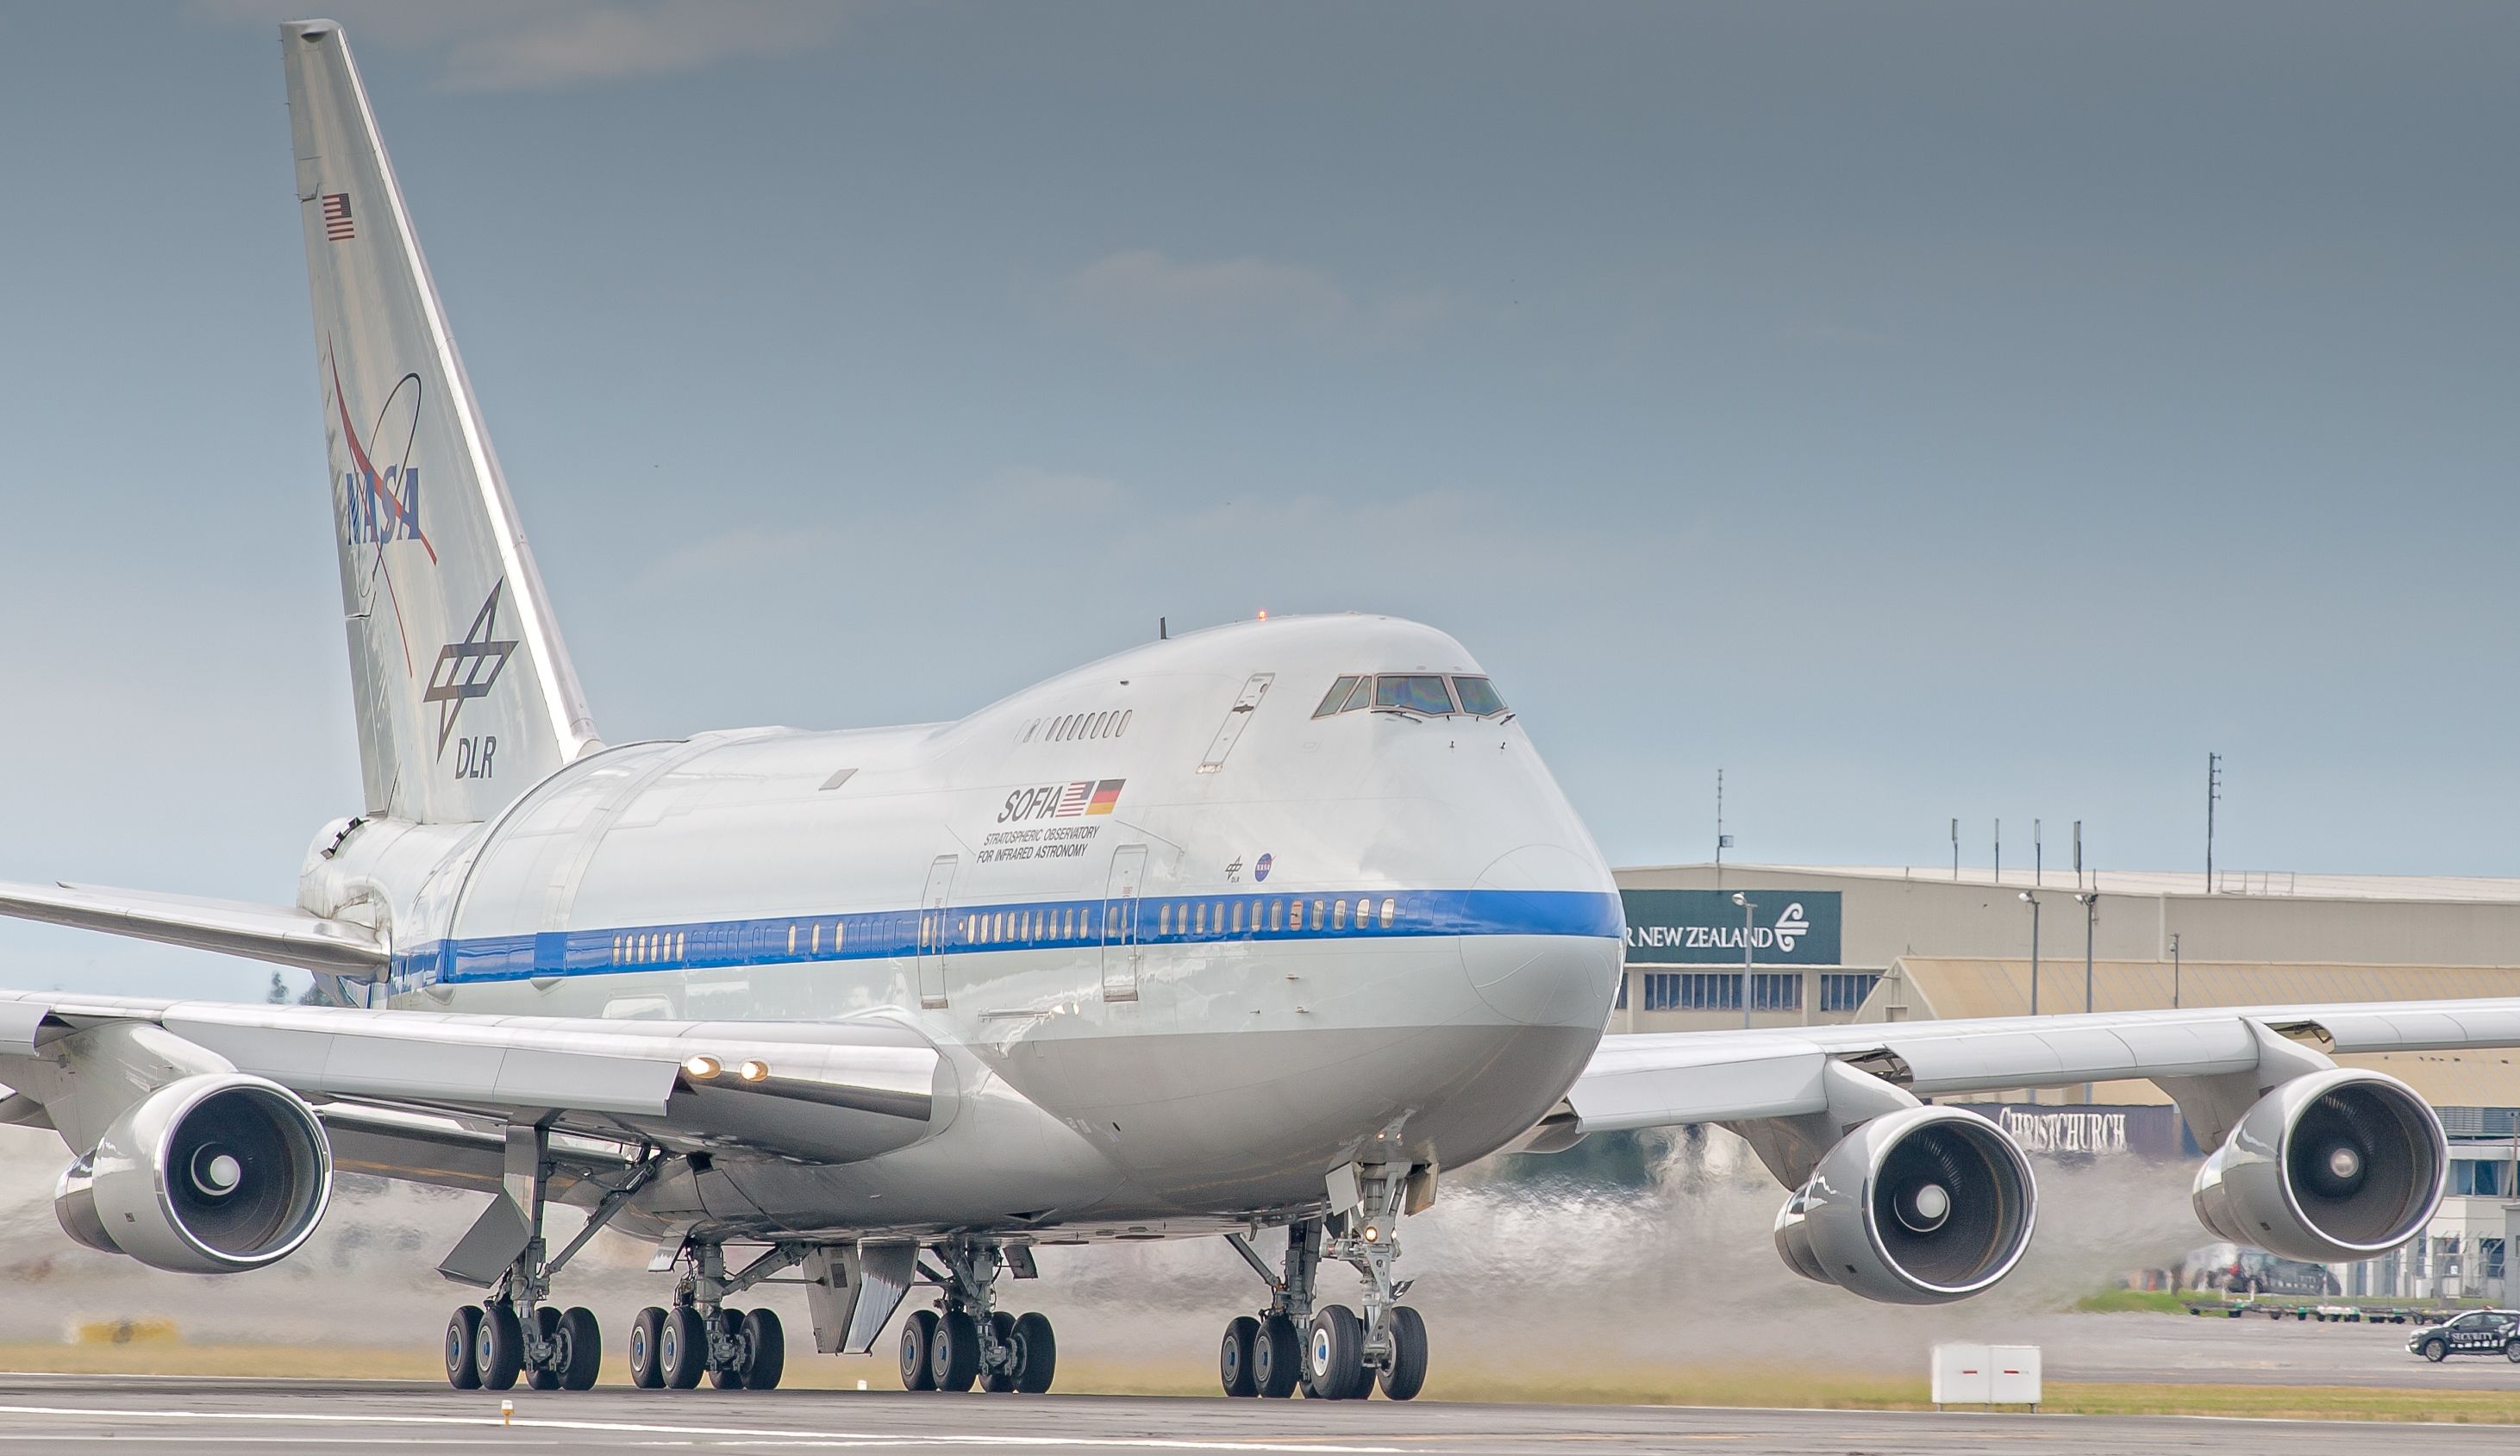 NASA's Boeing 747 parked in New Zealand. 